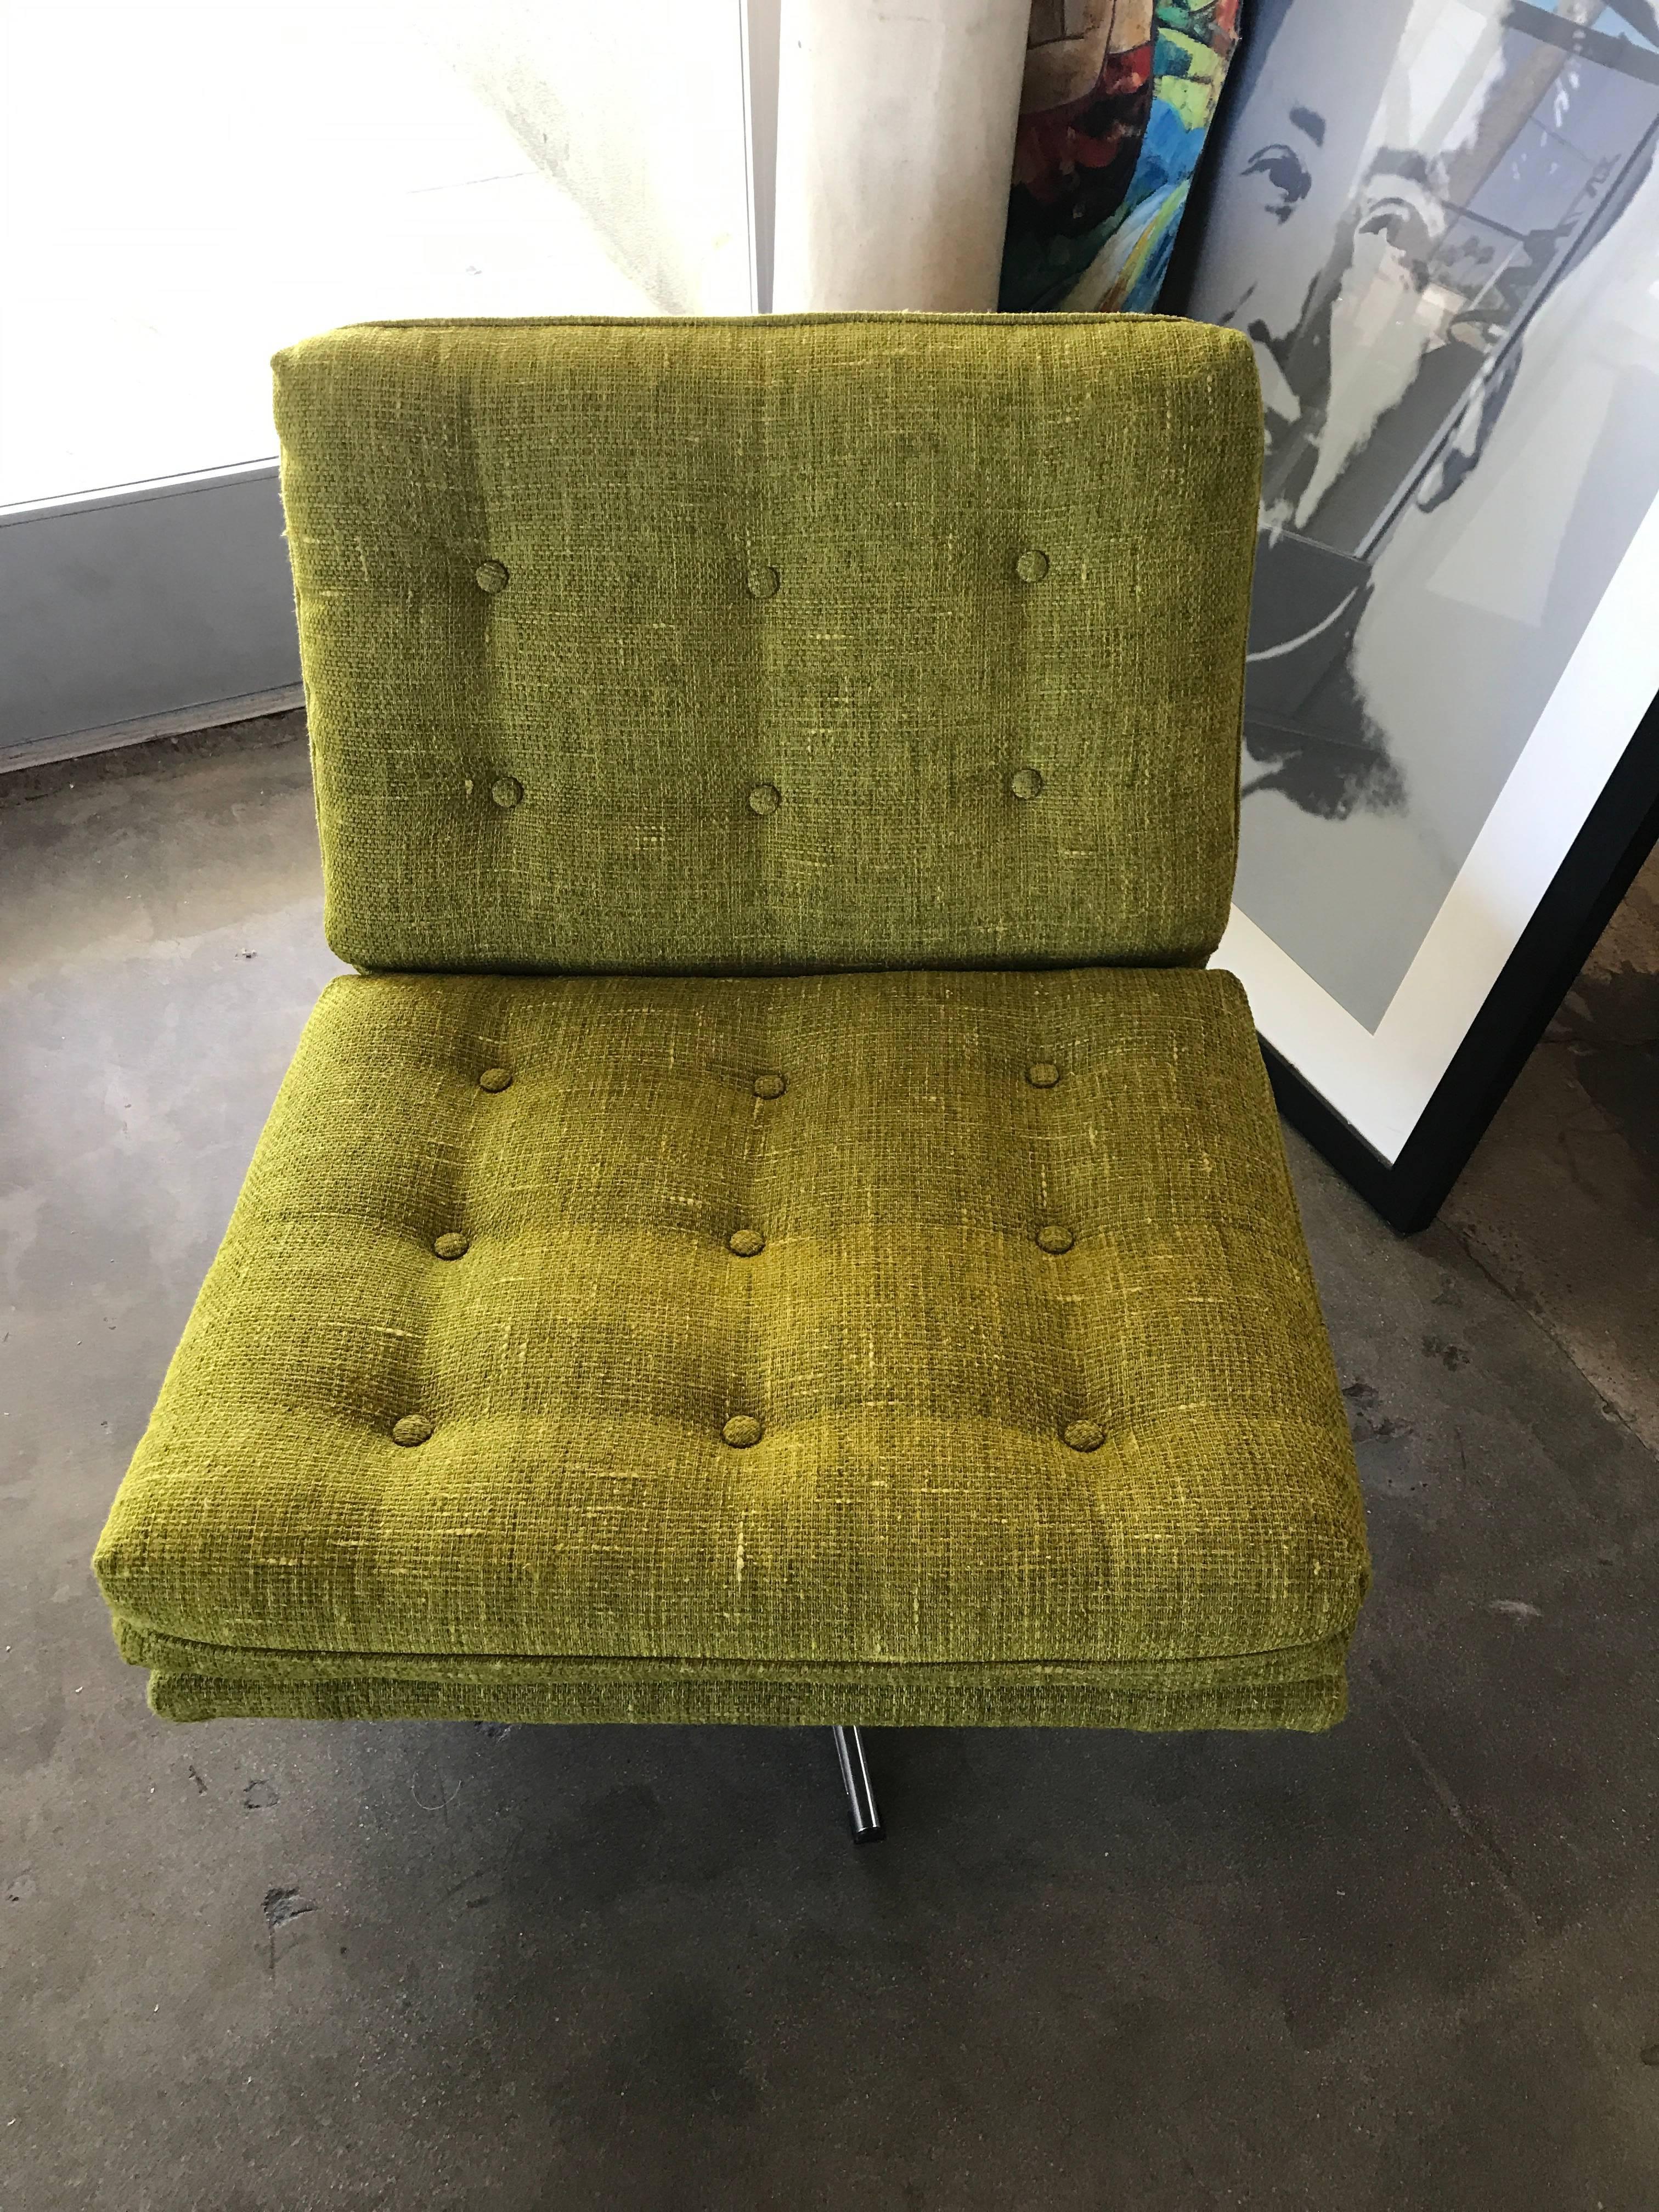 A nice lounge chair that swivels in a nice nubby citrus colored fabric. Recently reupholstered, but has a minor bit of fraying at some edges, which are pictured.